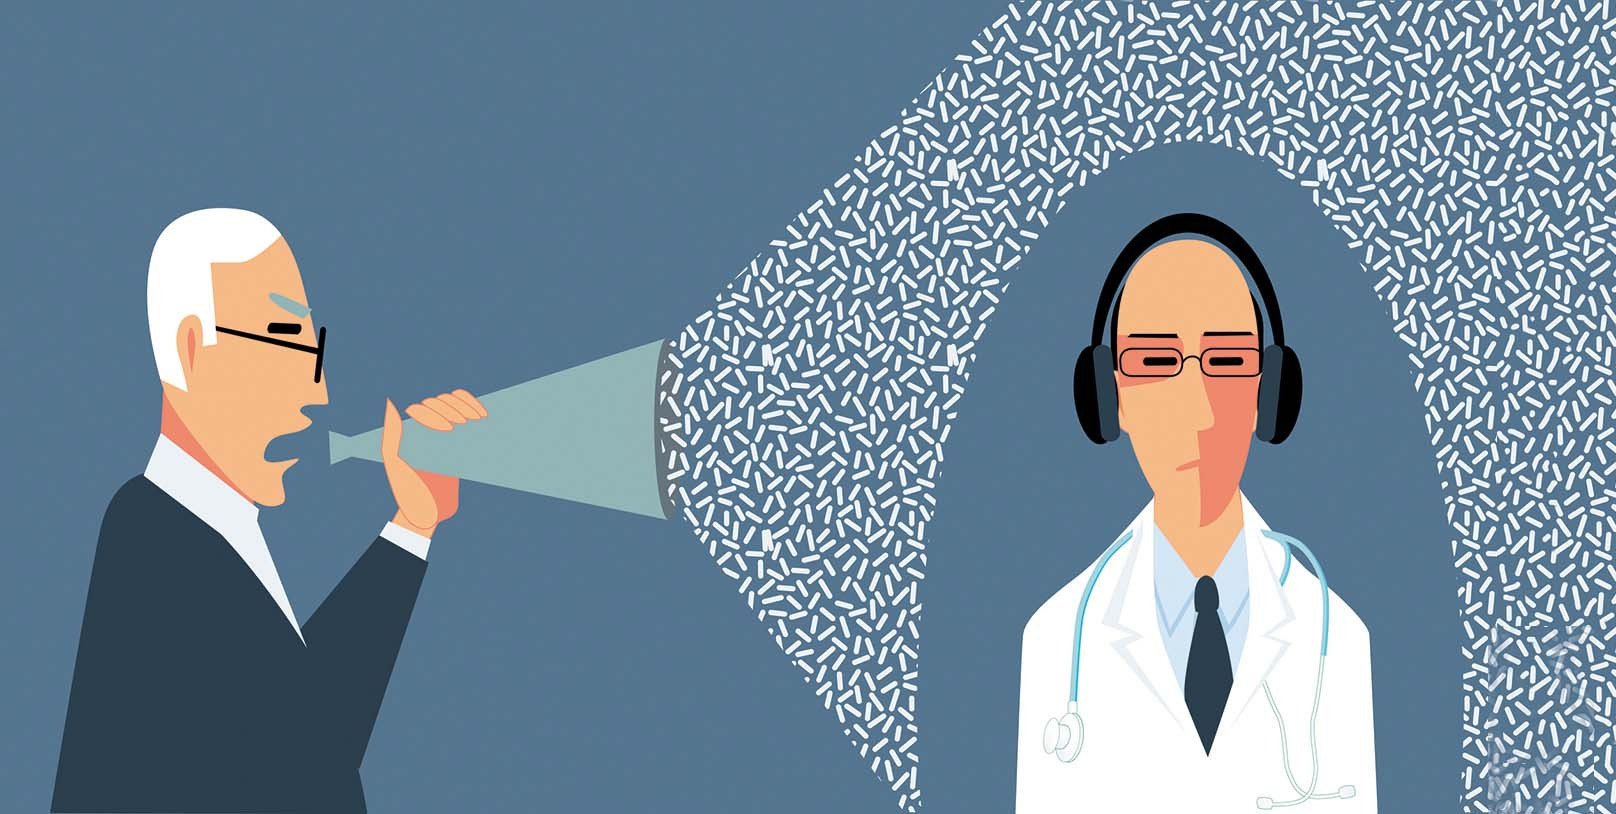 illustration of two people, one is holding a megaphone and speaking; the other is wearing a white coat and headphones, with white lines emerging from the megaphone and moving around the other person's head